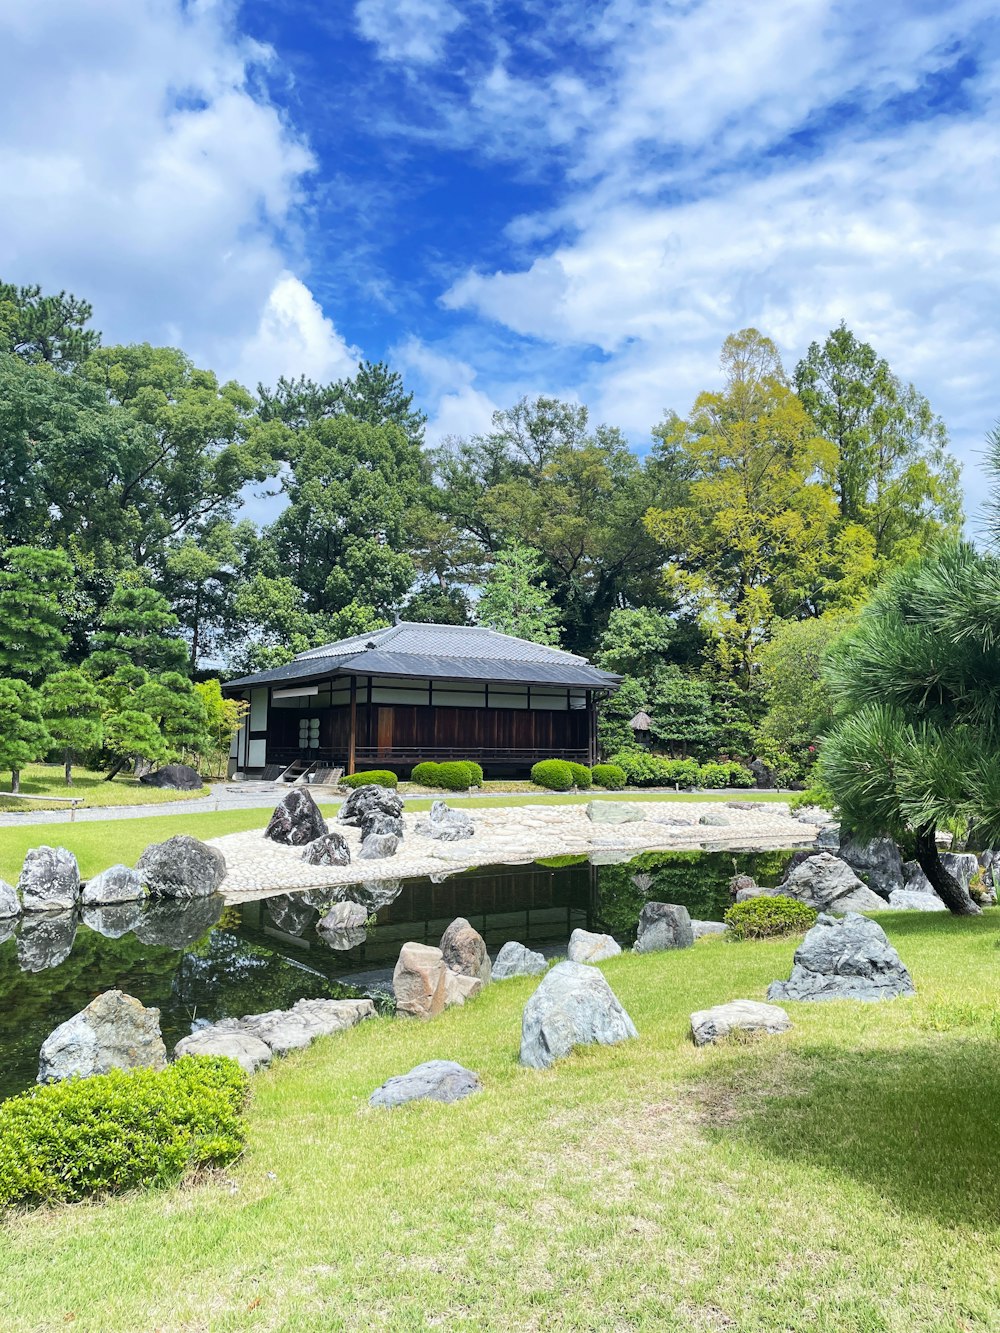 a gazebo in a park with a pond and rocks